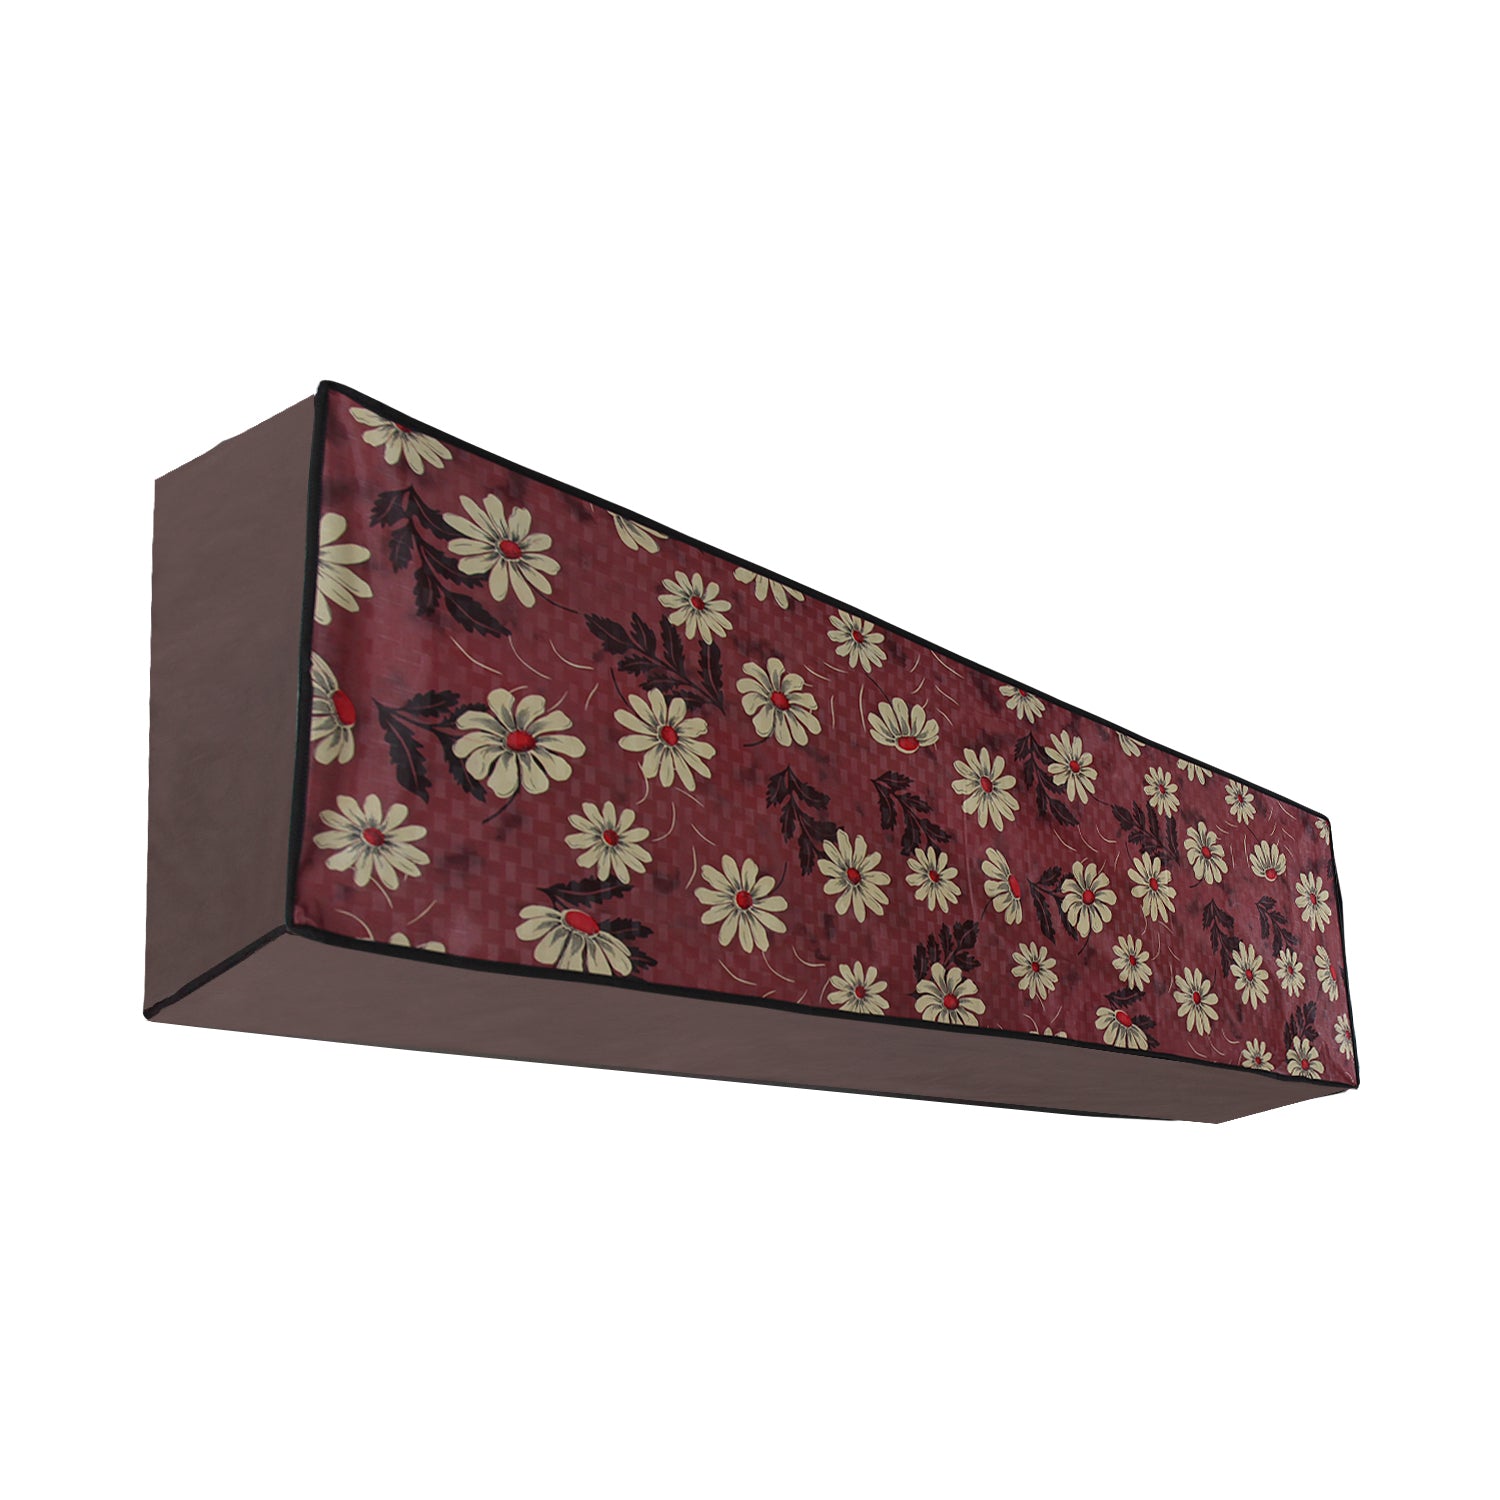 Waterproof and Dustproof Split Indoor AC Cover, SA18 - Dream Care Furnishings Private Limited